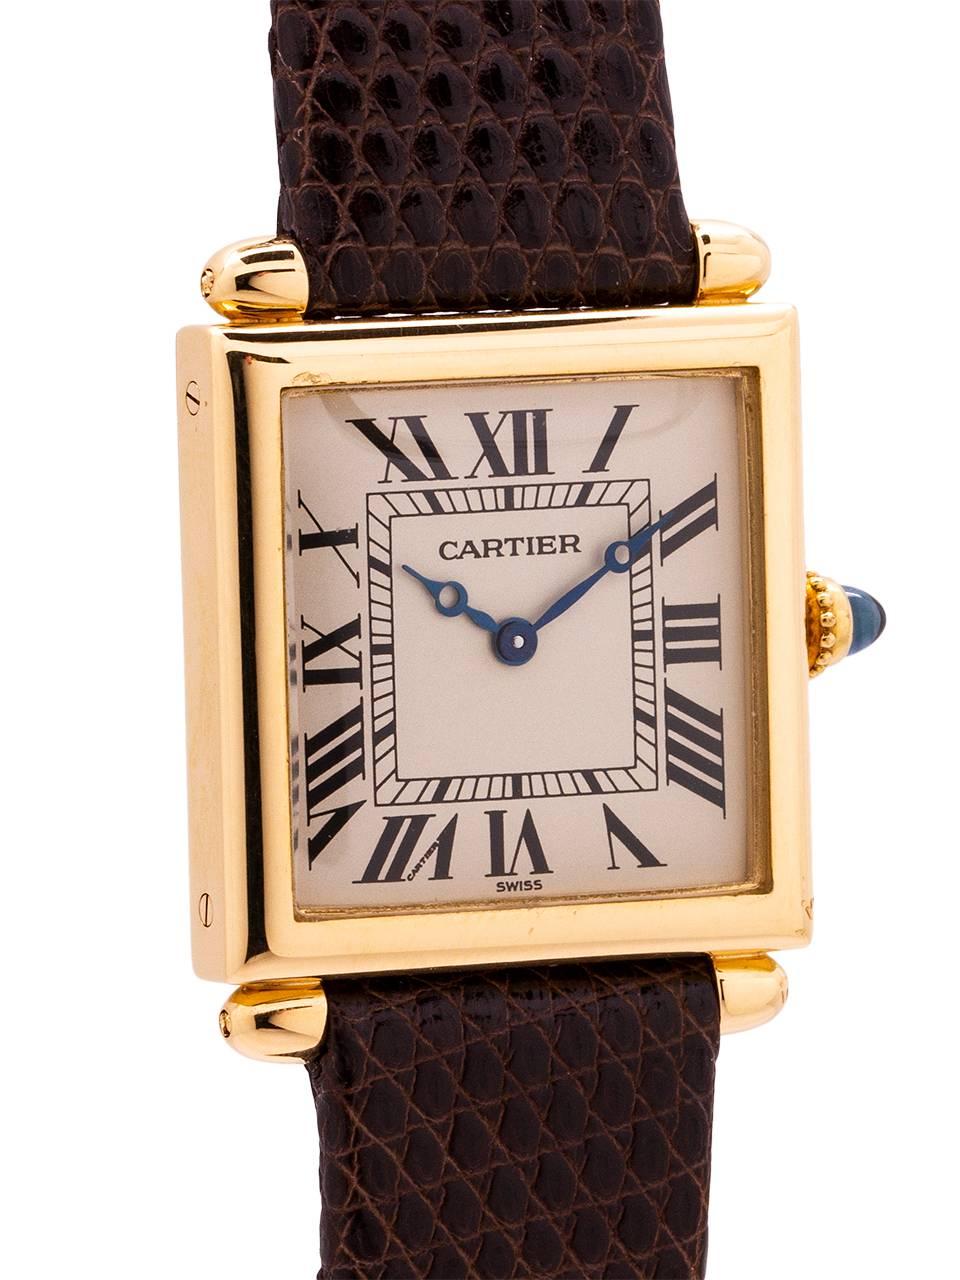 
Cartier man’s medium size 18K YG Obus model featuring a 24 x 31mm case with bullet shaped lugs, with silvered dial with classic bold Roman figures, blued steel moon style hands. Battery powered quartz movement. With generic genuine brown lizard